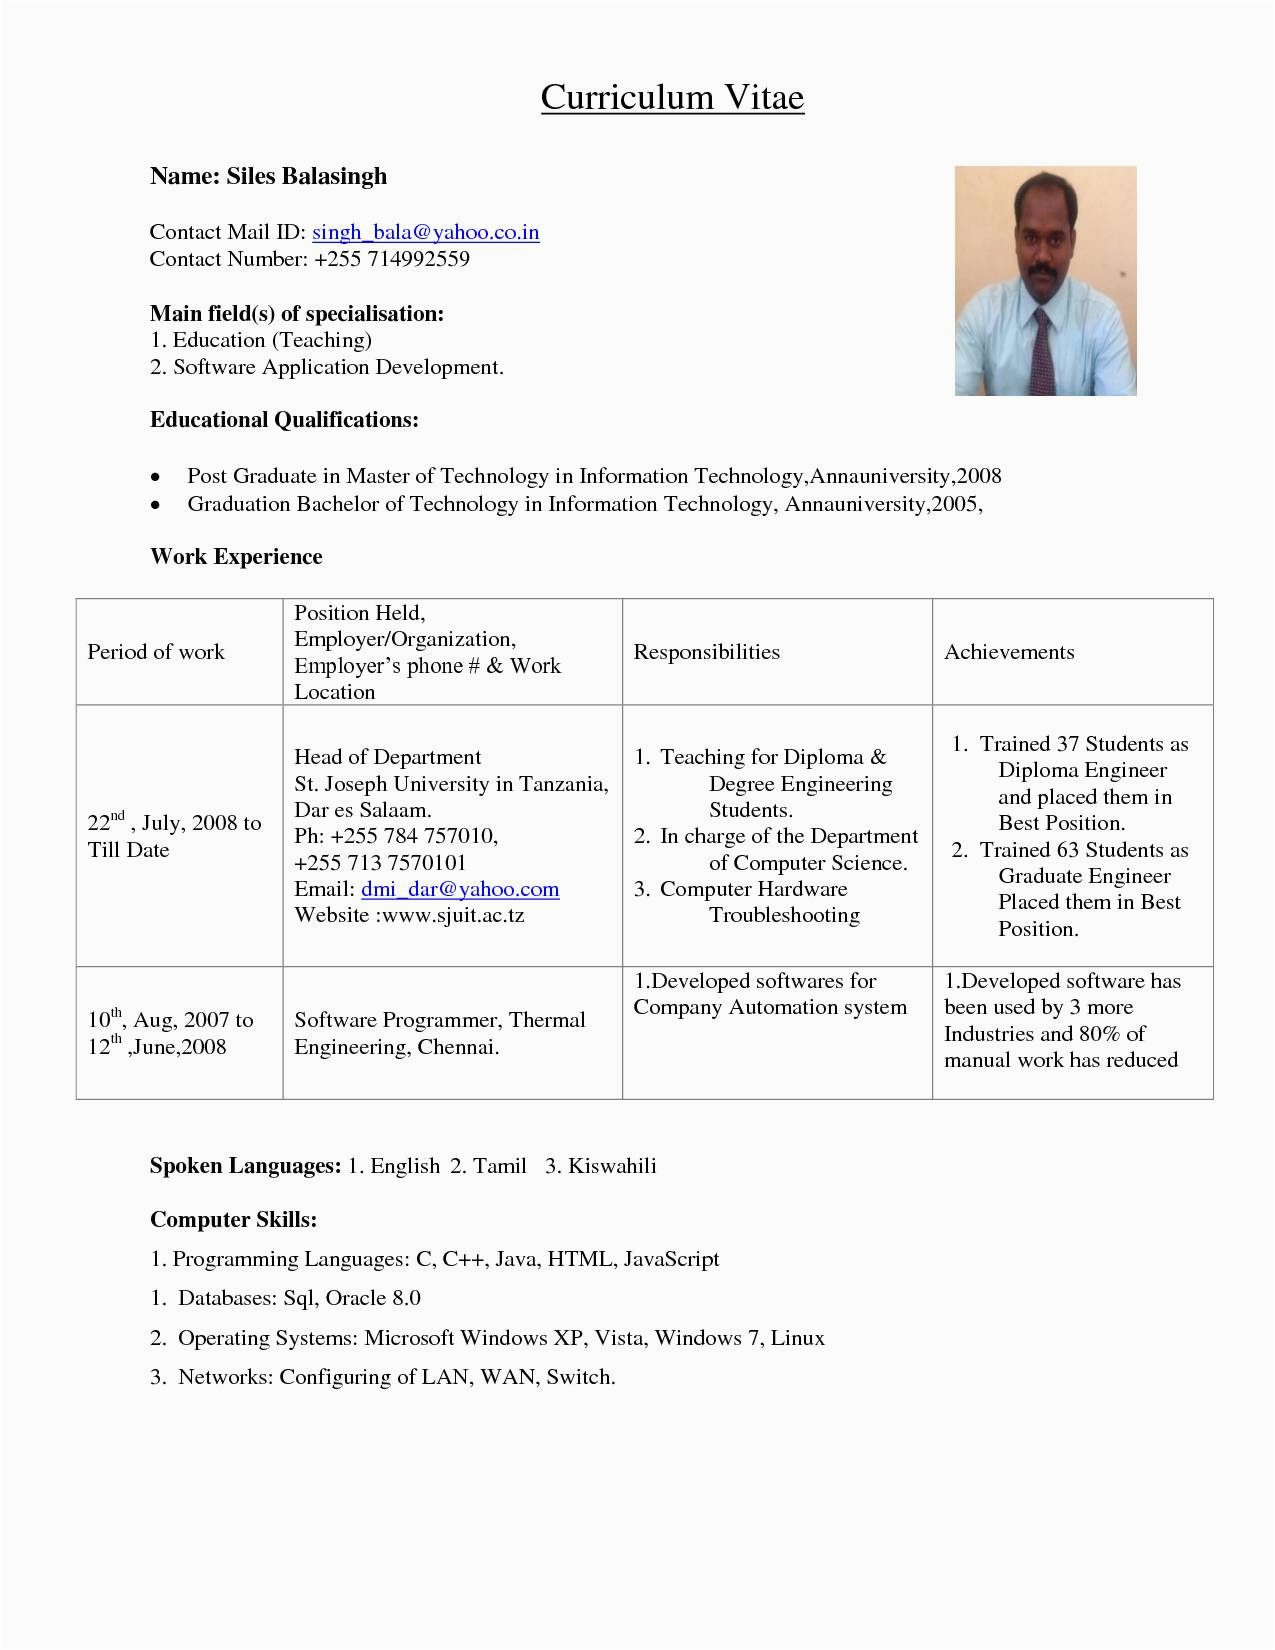 Sample Resume for assistant Professor Position In Engineering College Resume format for Lecturer Job In Engineering College